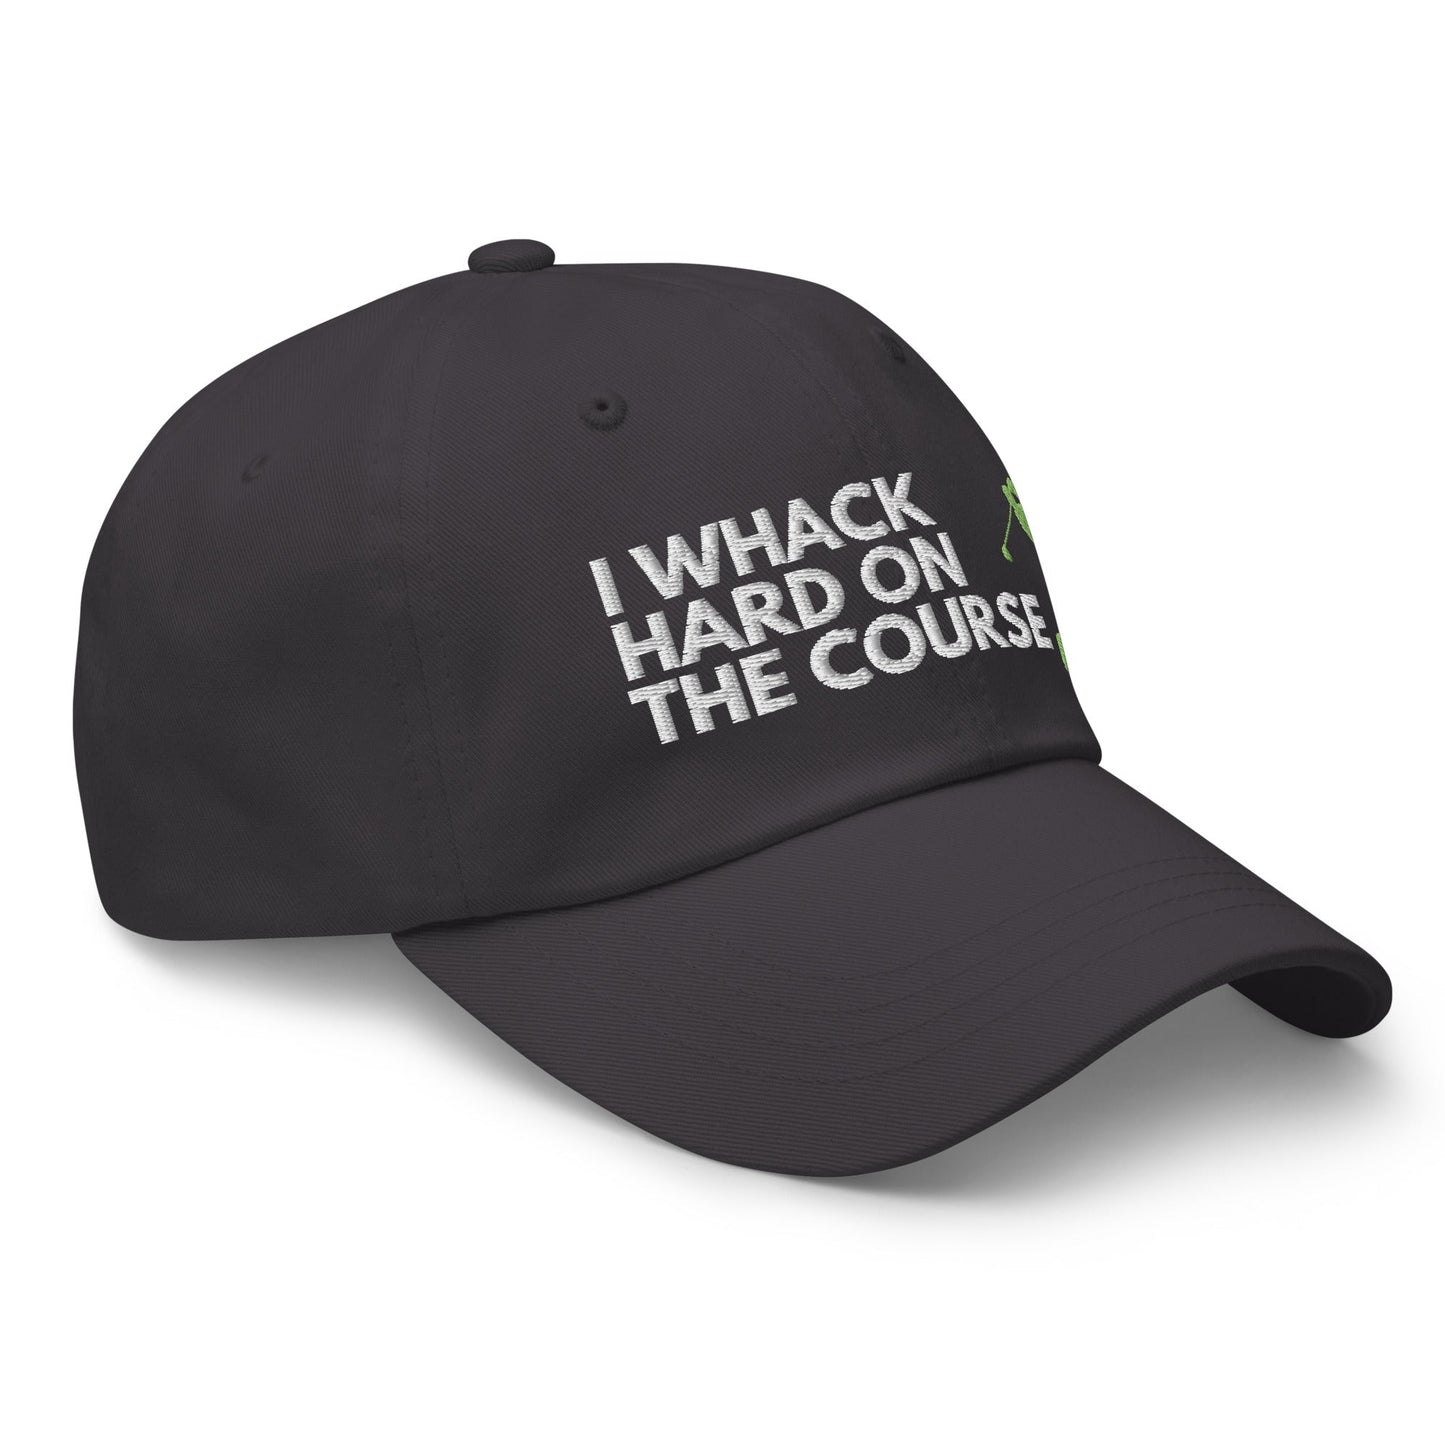 Funny Golfer Gifts  Dad Cap Dark Grey I Whack Hard On The Course Cap